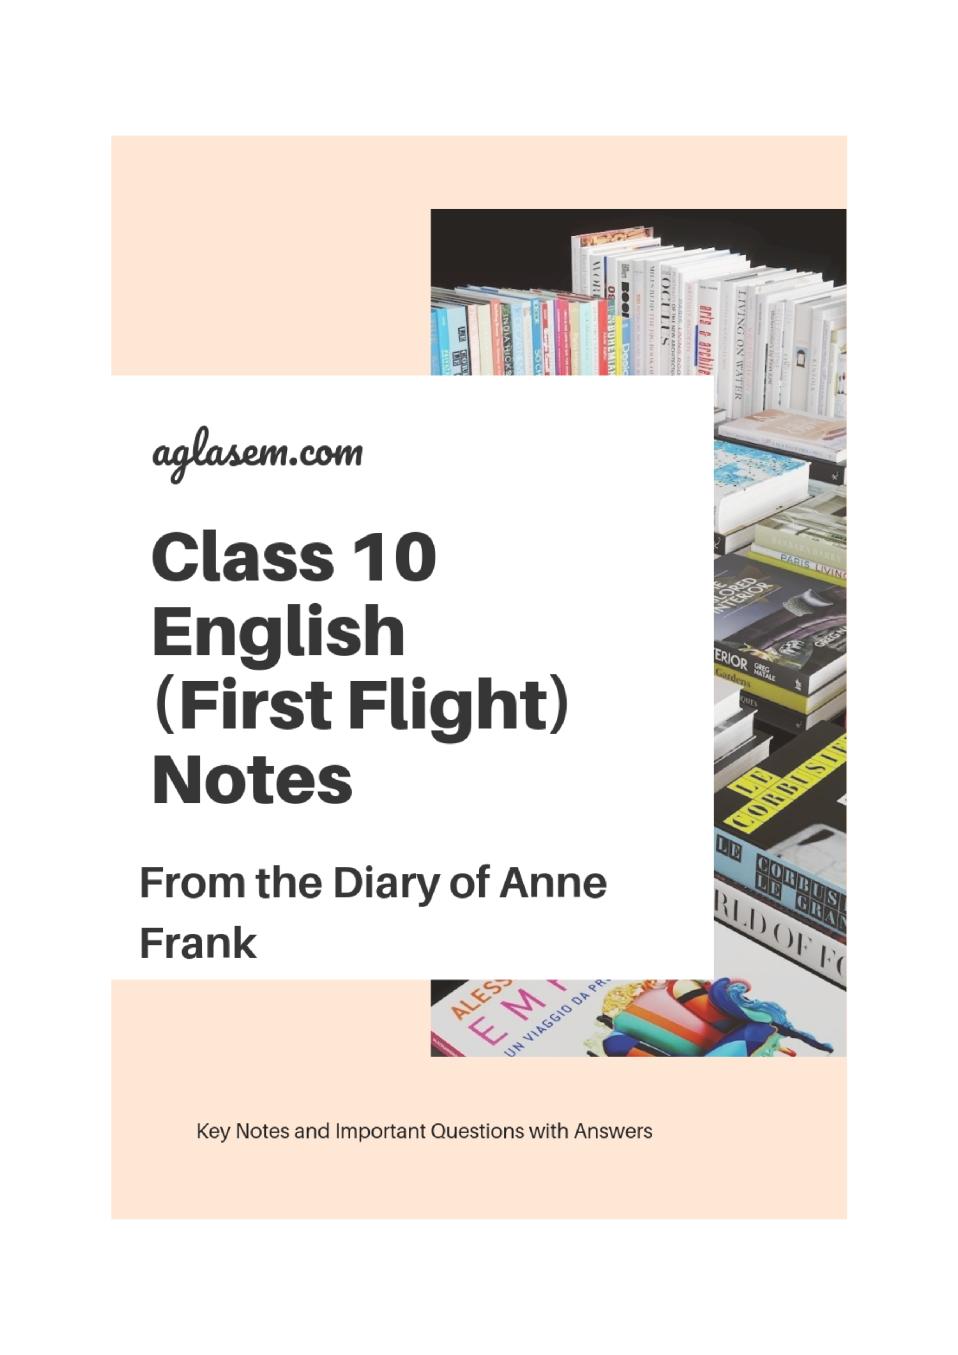 Class 10 English First Flight Notes For From the Diary of Anne Frank - Page 1